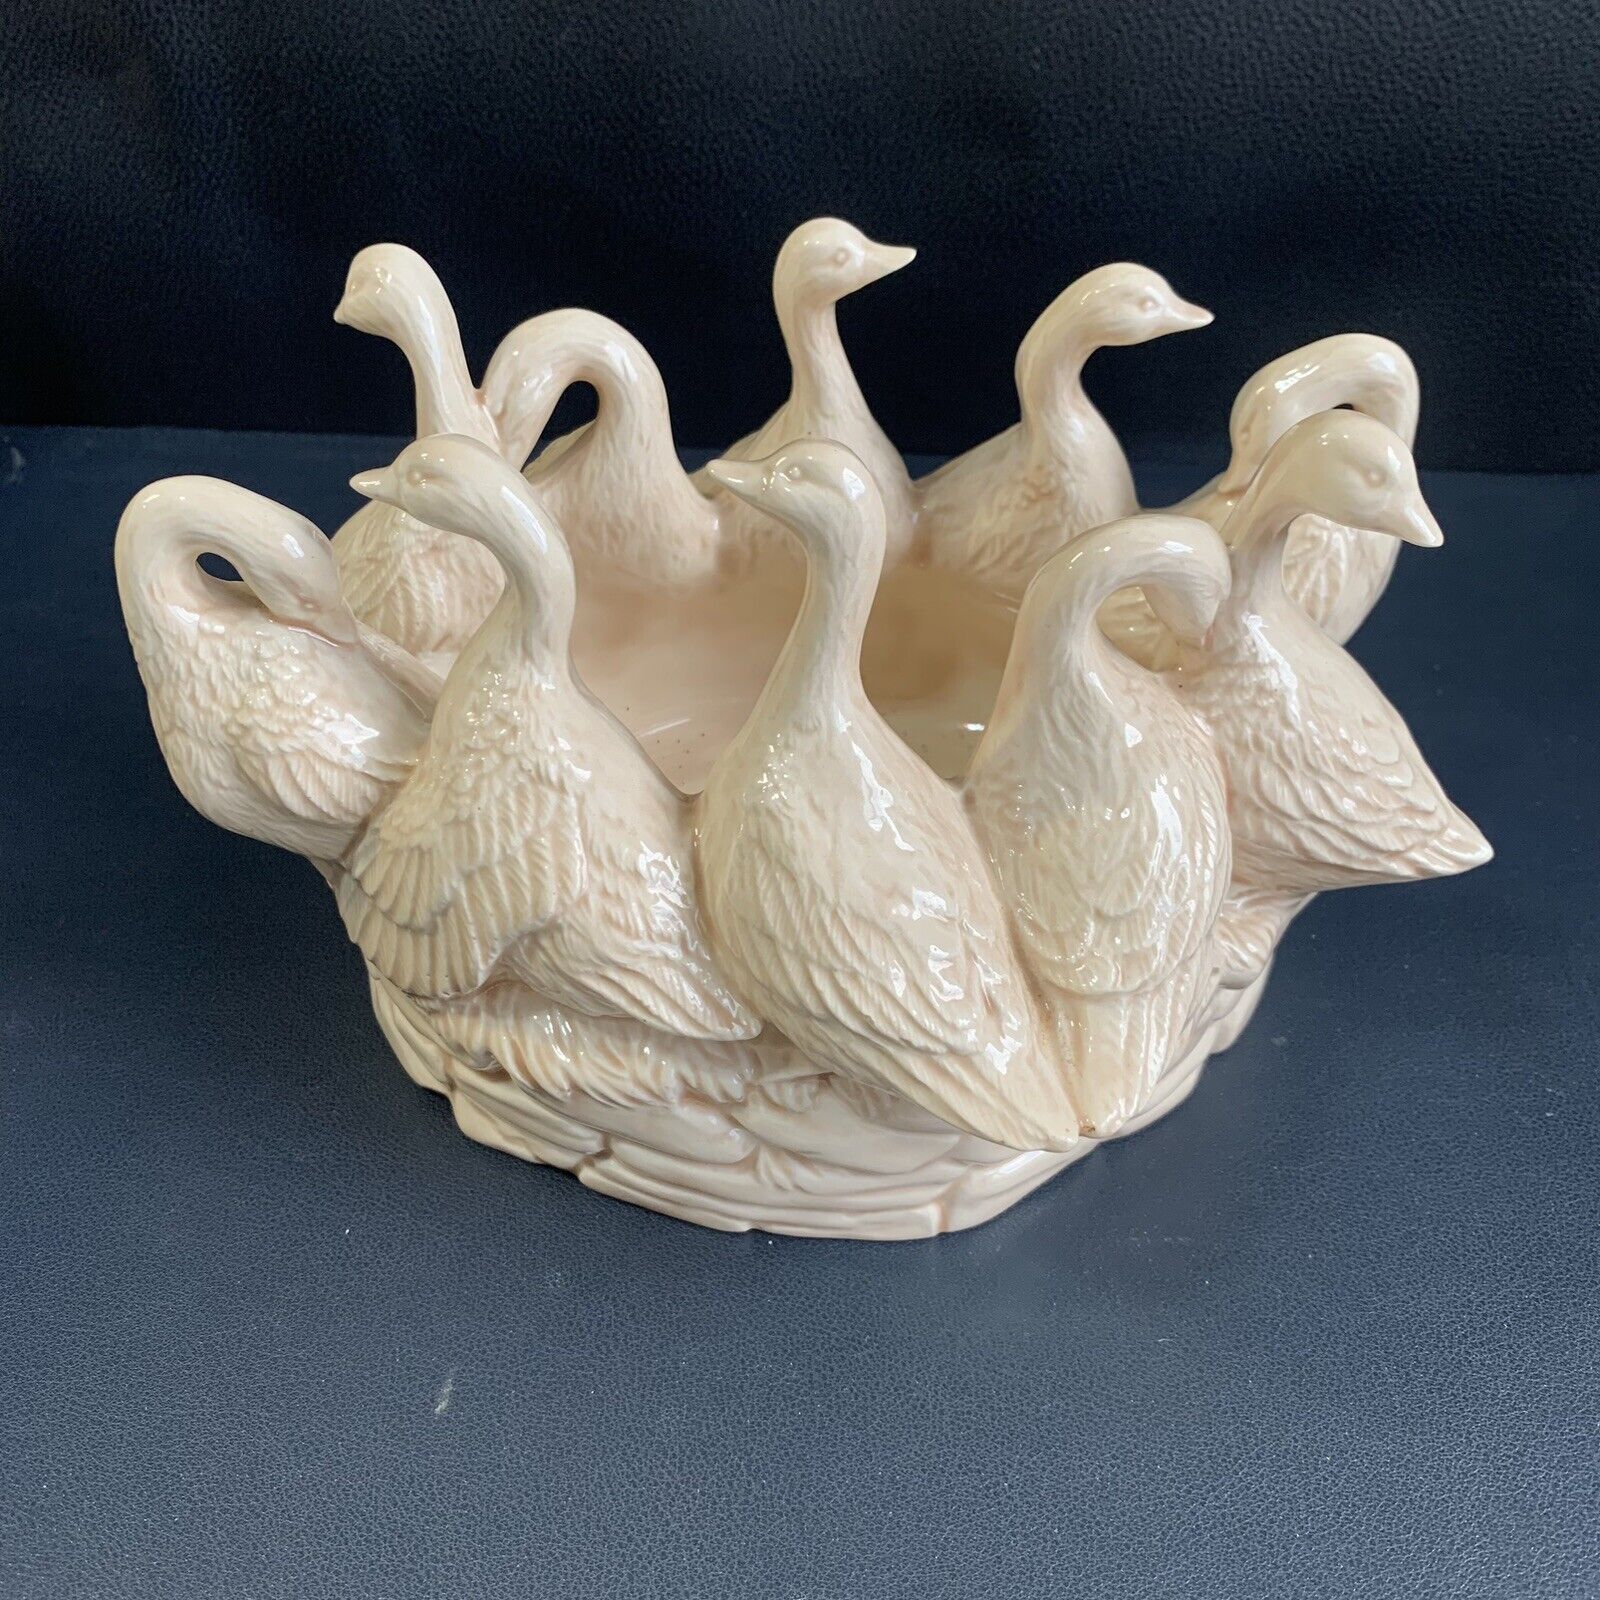 Vintage Ceramic Geese On Nest Planter Bowl Signed, 10 Geese Two Piece Mold